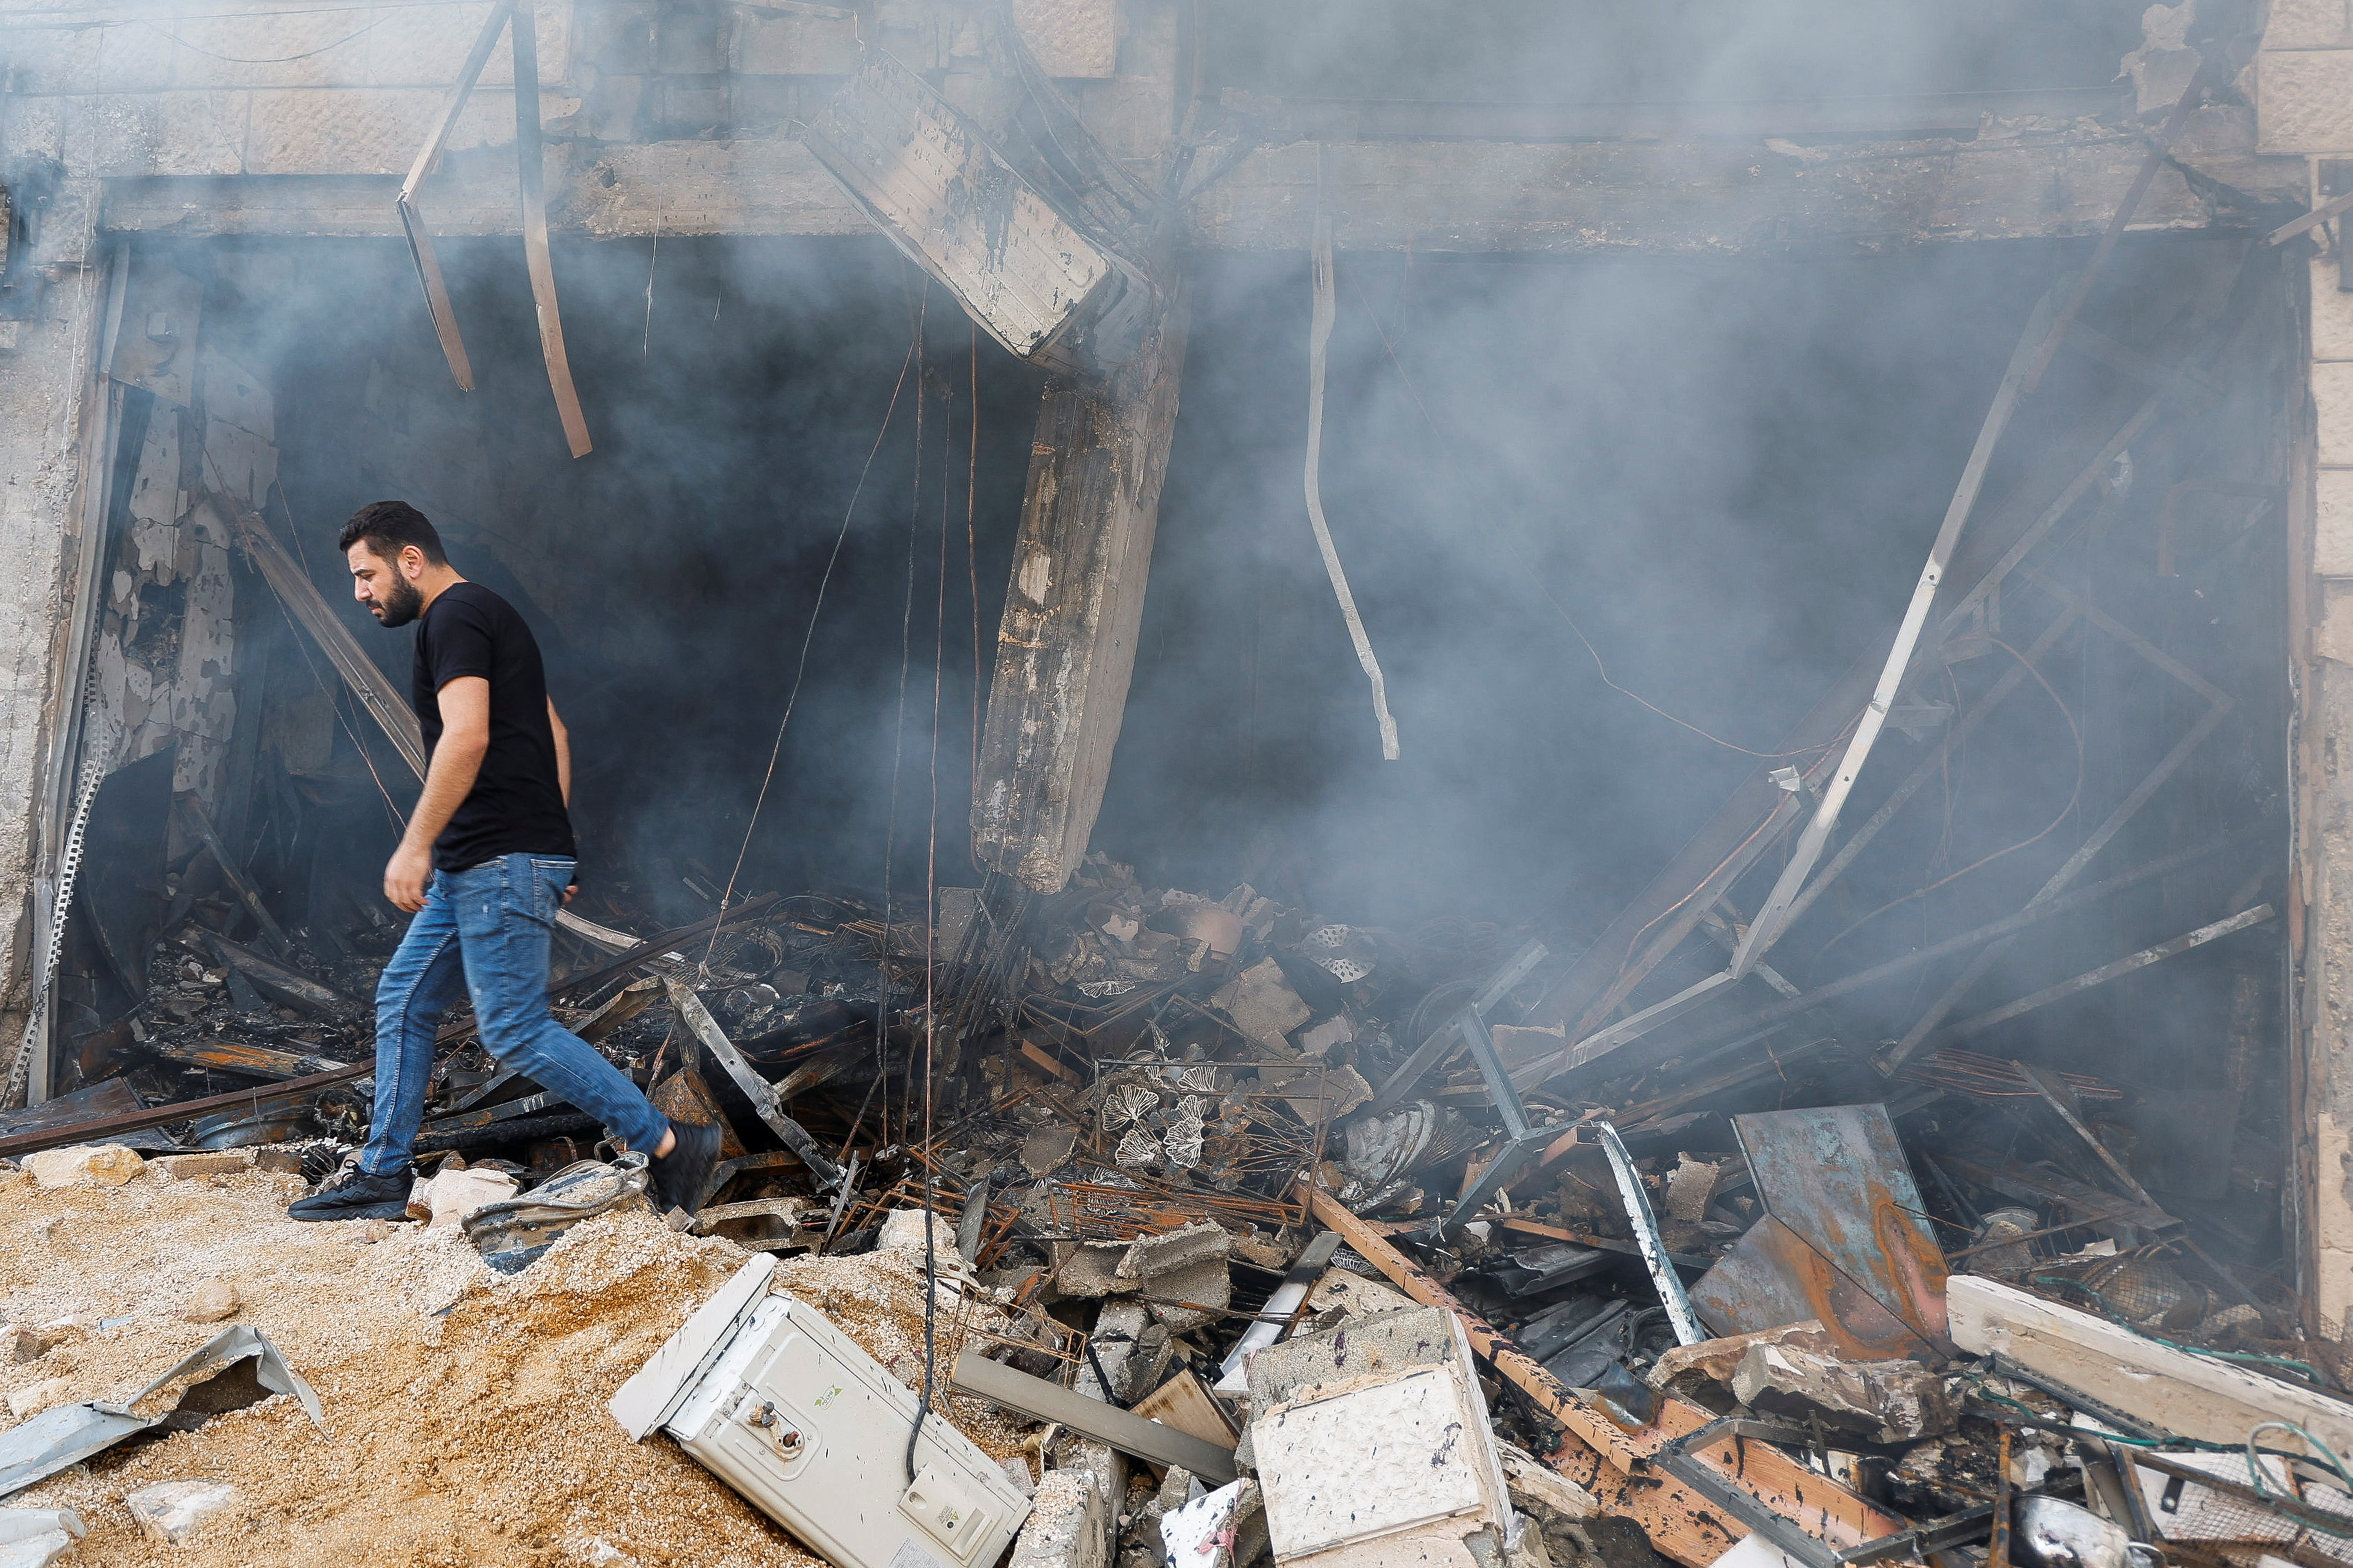 A Palestinian man inspects the wreckage of a house in Gaza after another strike by Israeli forces. /Raneen Sawafta/Reuters